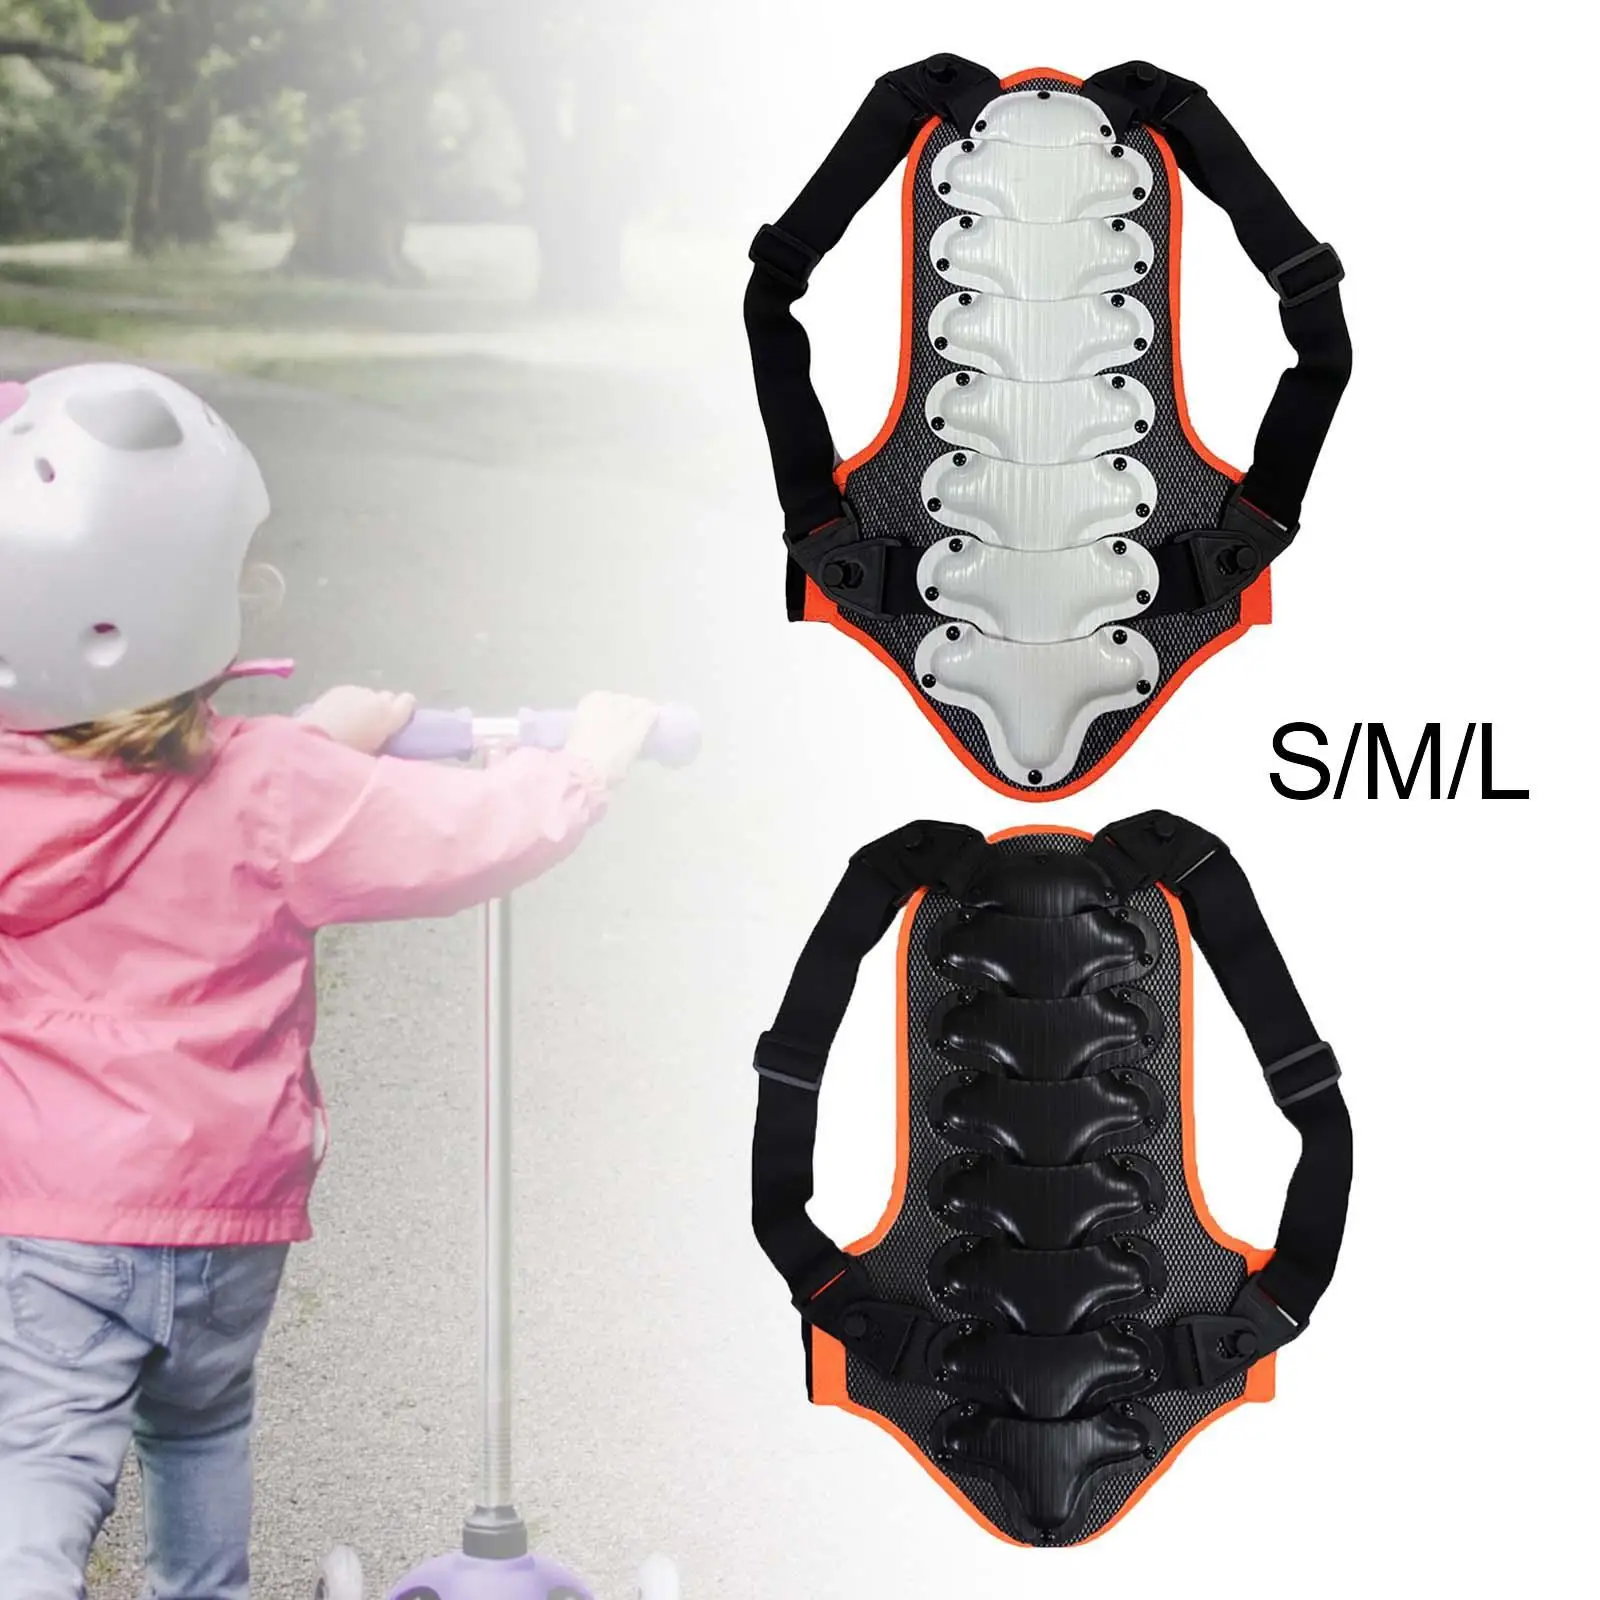 Children Back protector Protective Cushion for Downhill Mountain Bike Motorcross Skiing Motorcycle